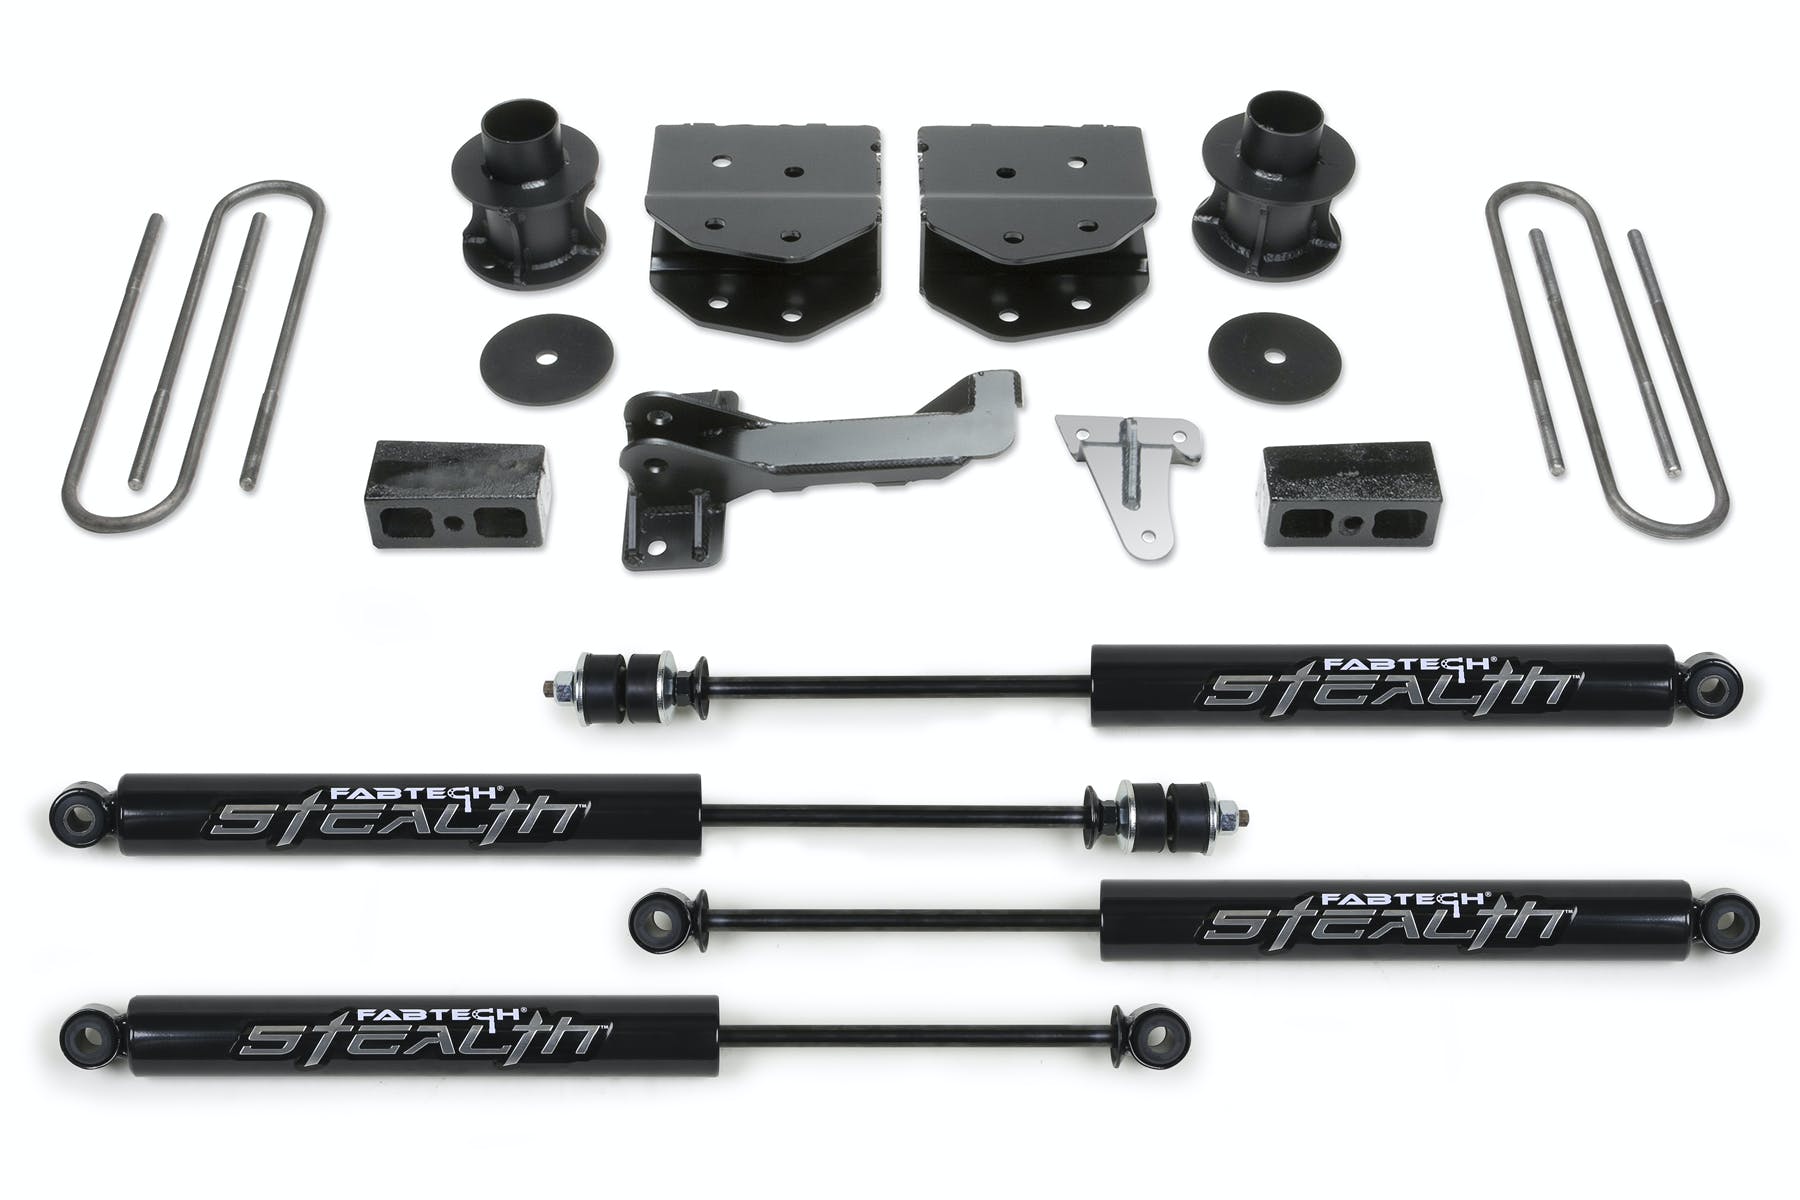 Fabtech K2160M 4in. BUDGET SYS W/STEALTH 2008-15 FORD F250/350/450 4WD 8 LUG ONLY